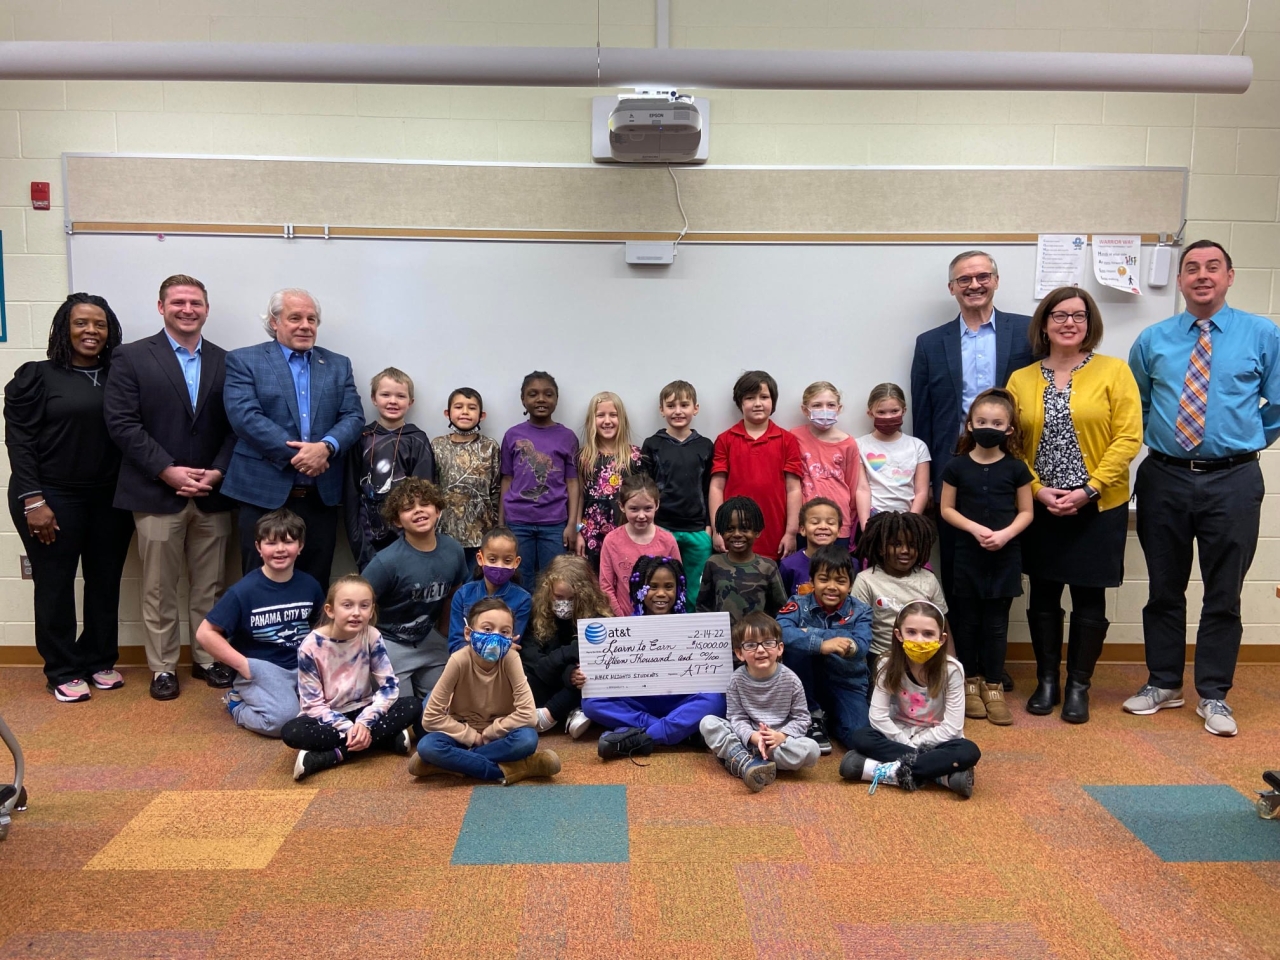 State Representative Phil Plummer presented a $15,000 grant with AT&T Foundation to support summer learning programs at Rushmore Elementary School.